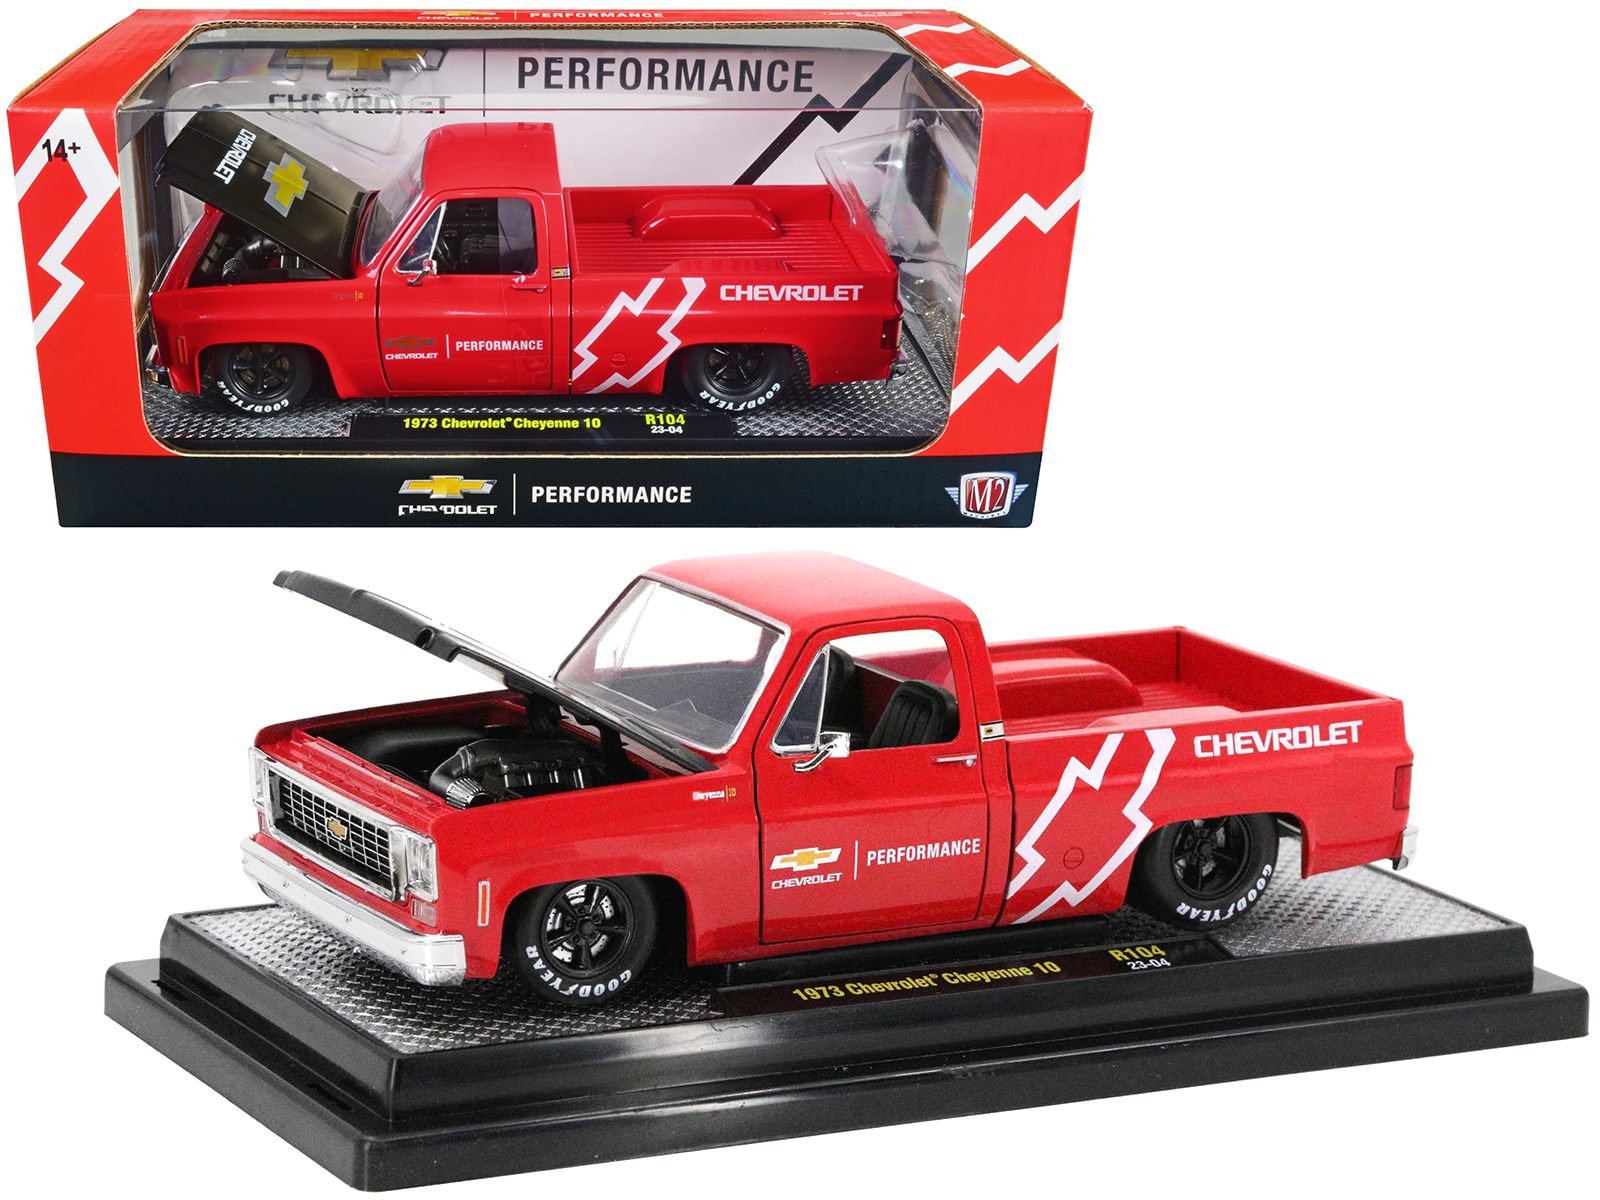 M2 1973 Chevrolet Cheyenne 10 Pickup Truck Bright Red with Black Hon to 7250 pieces Worldwide 1/24 Diecast Model Car by M2 Machines